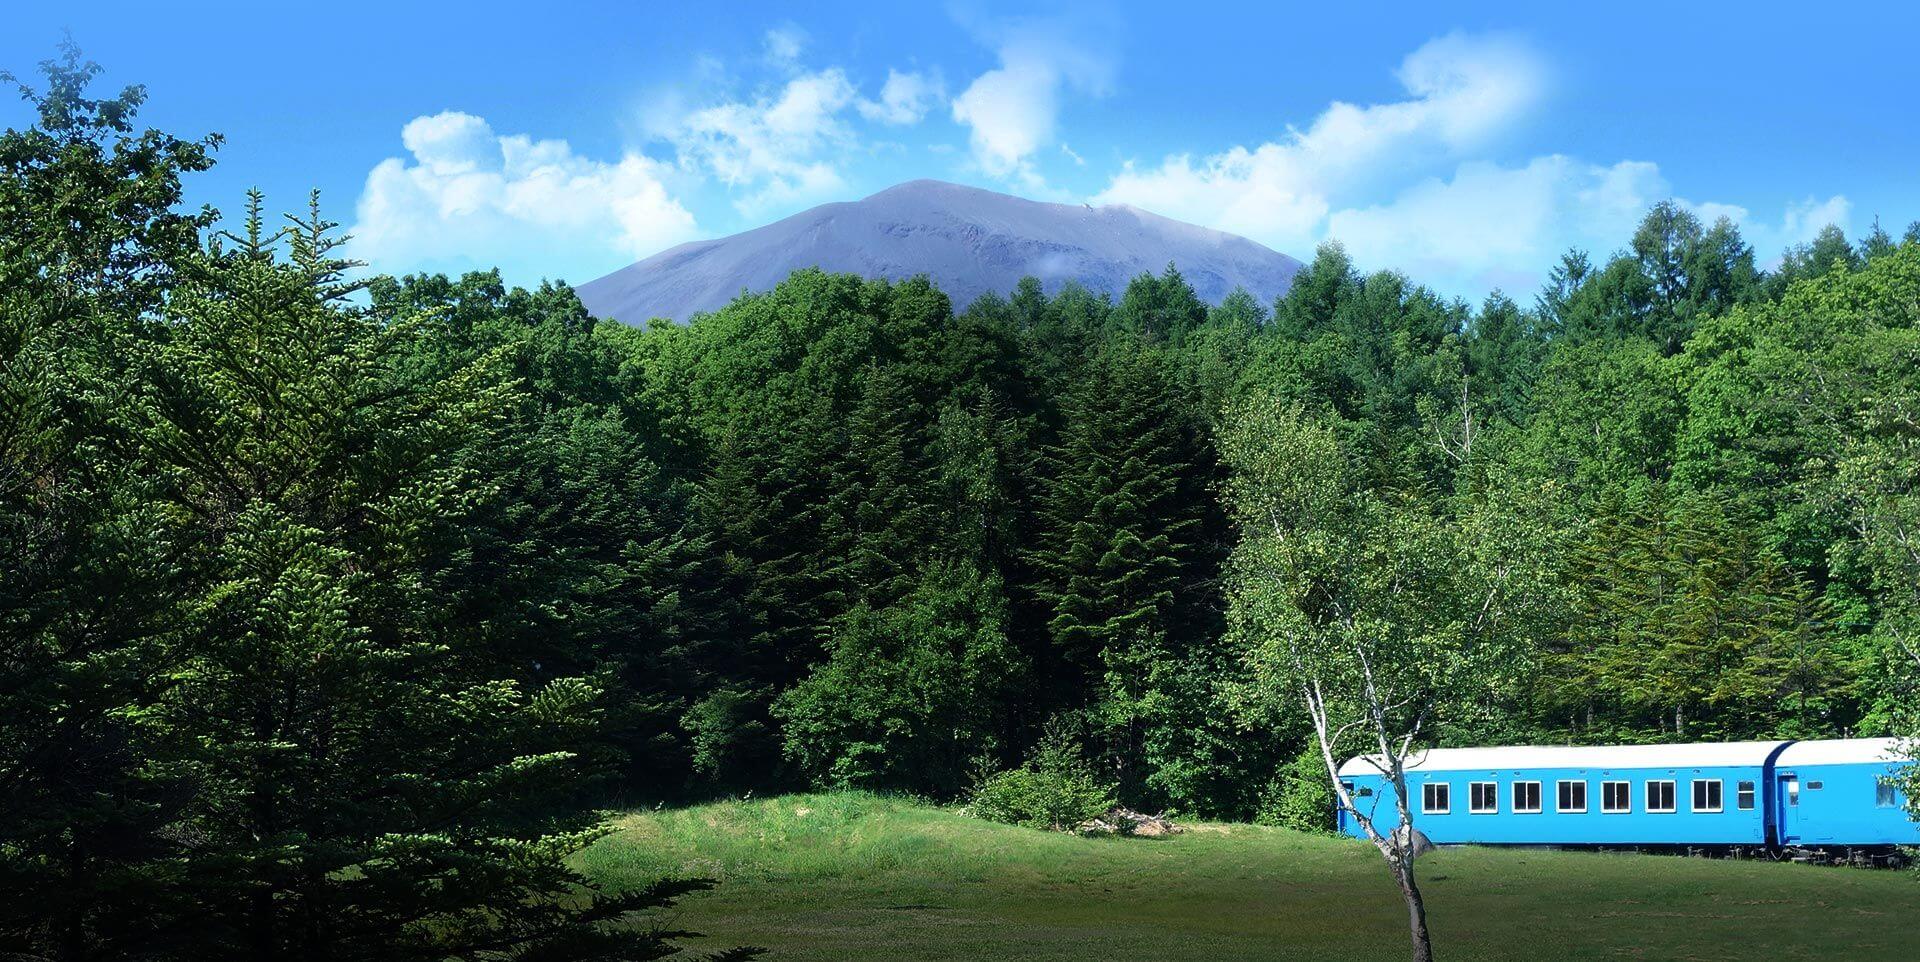 A resort on a highland in Kitakaruizawa with elevation of 1,200m